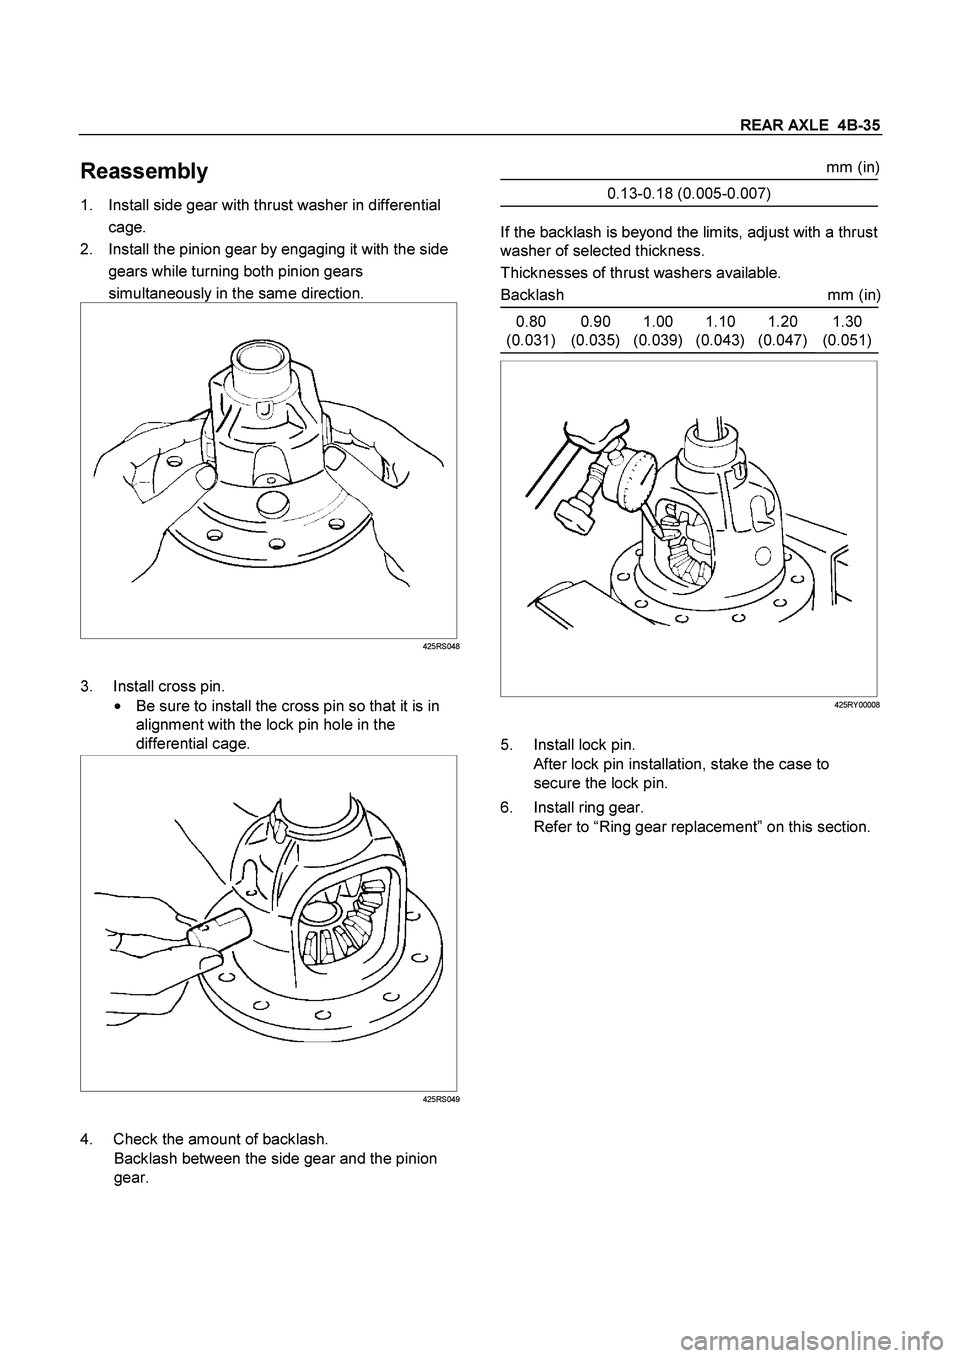 ISUZU TF SERIES 2004  Workshop Manual REAR AXLE  4B-35
 
Reassembly 
1.  Install side gear with thrust washer in differential 
cage. 
2.  Install the pinion gear by engaging it with the side 
gears while turning both pinion gears 
simulta